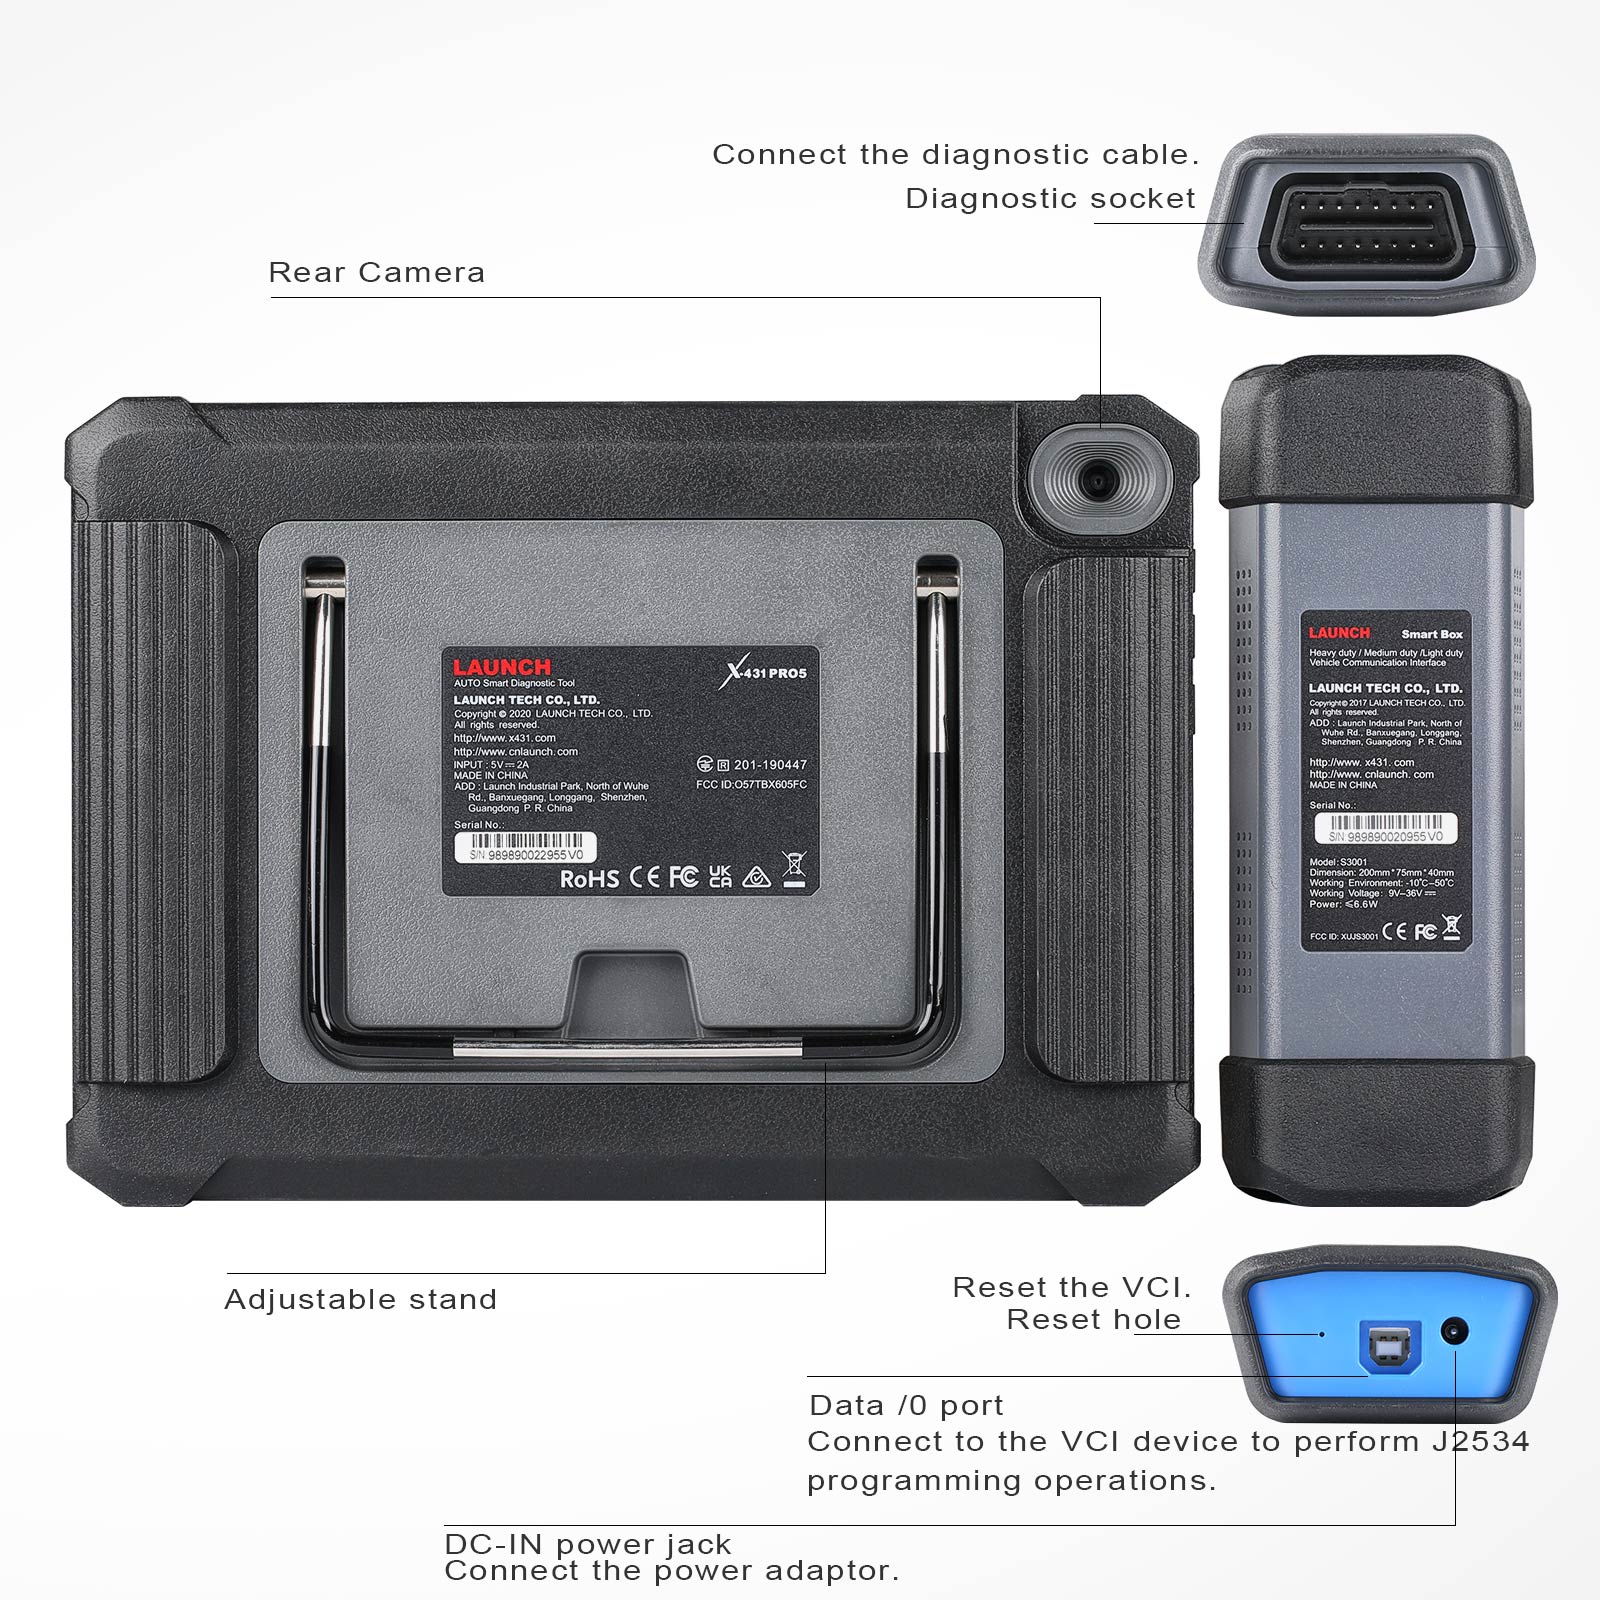 Launch X431 PRO5 Full System Car Diagnostic Tool with Smart Box 3.0 Upgrade  Version of X431